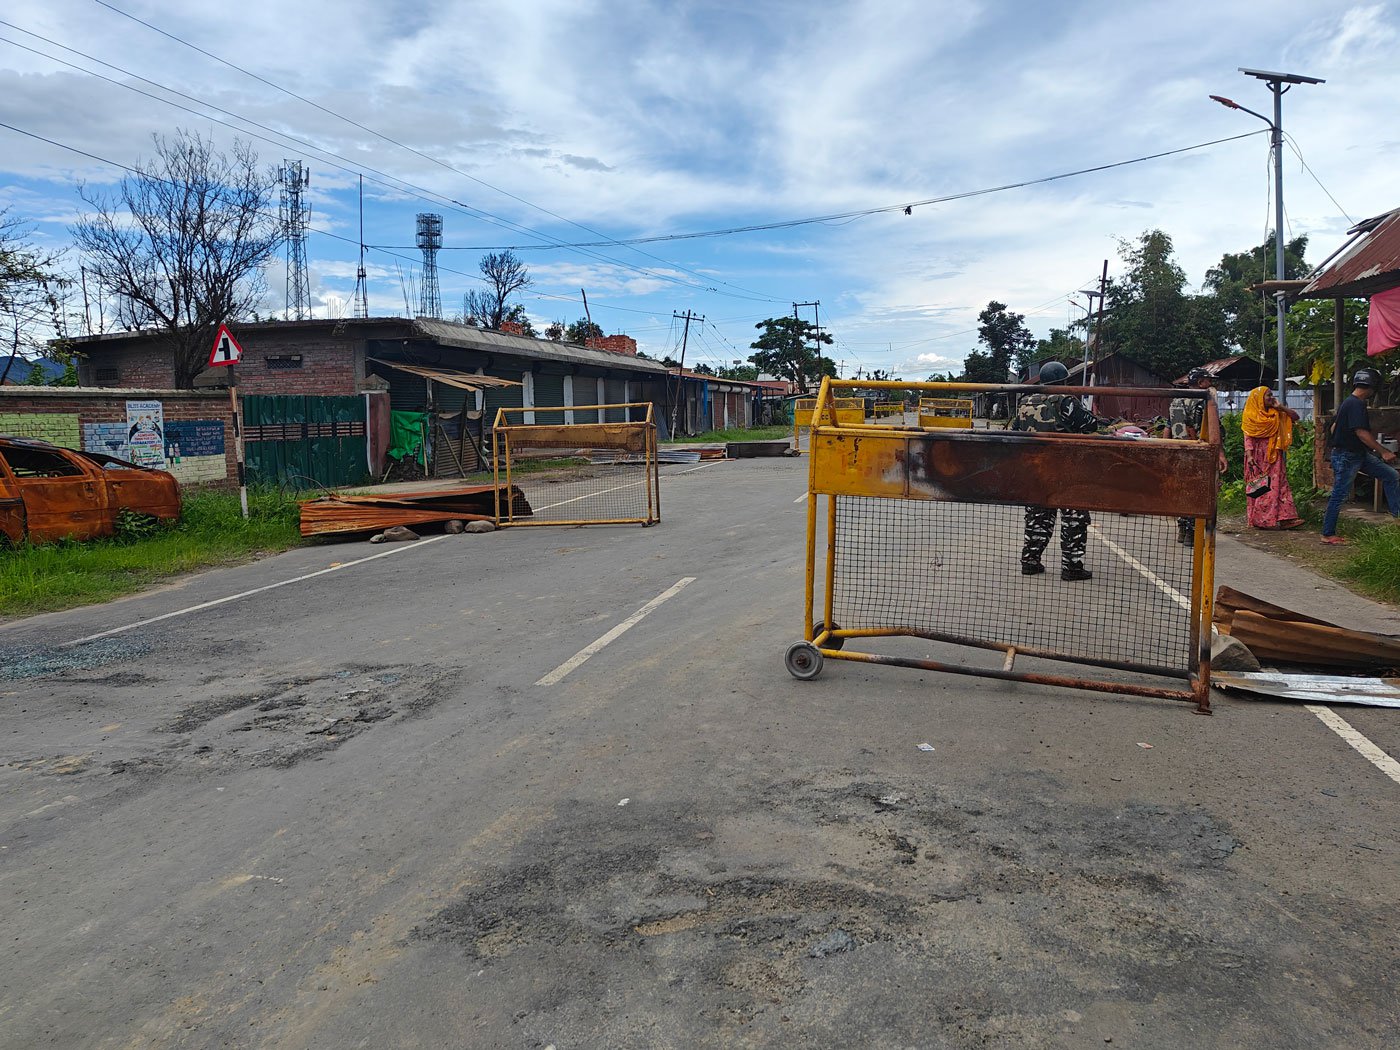 Barricades put up by paramilitary forces along the borders of Imphal and Churachandpur, Manipur